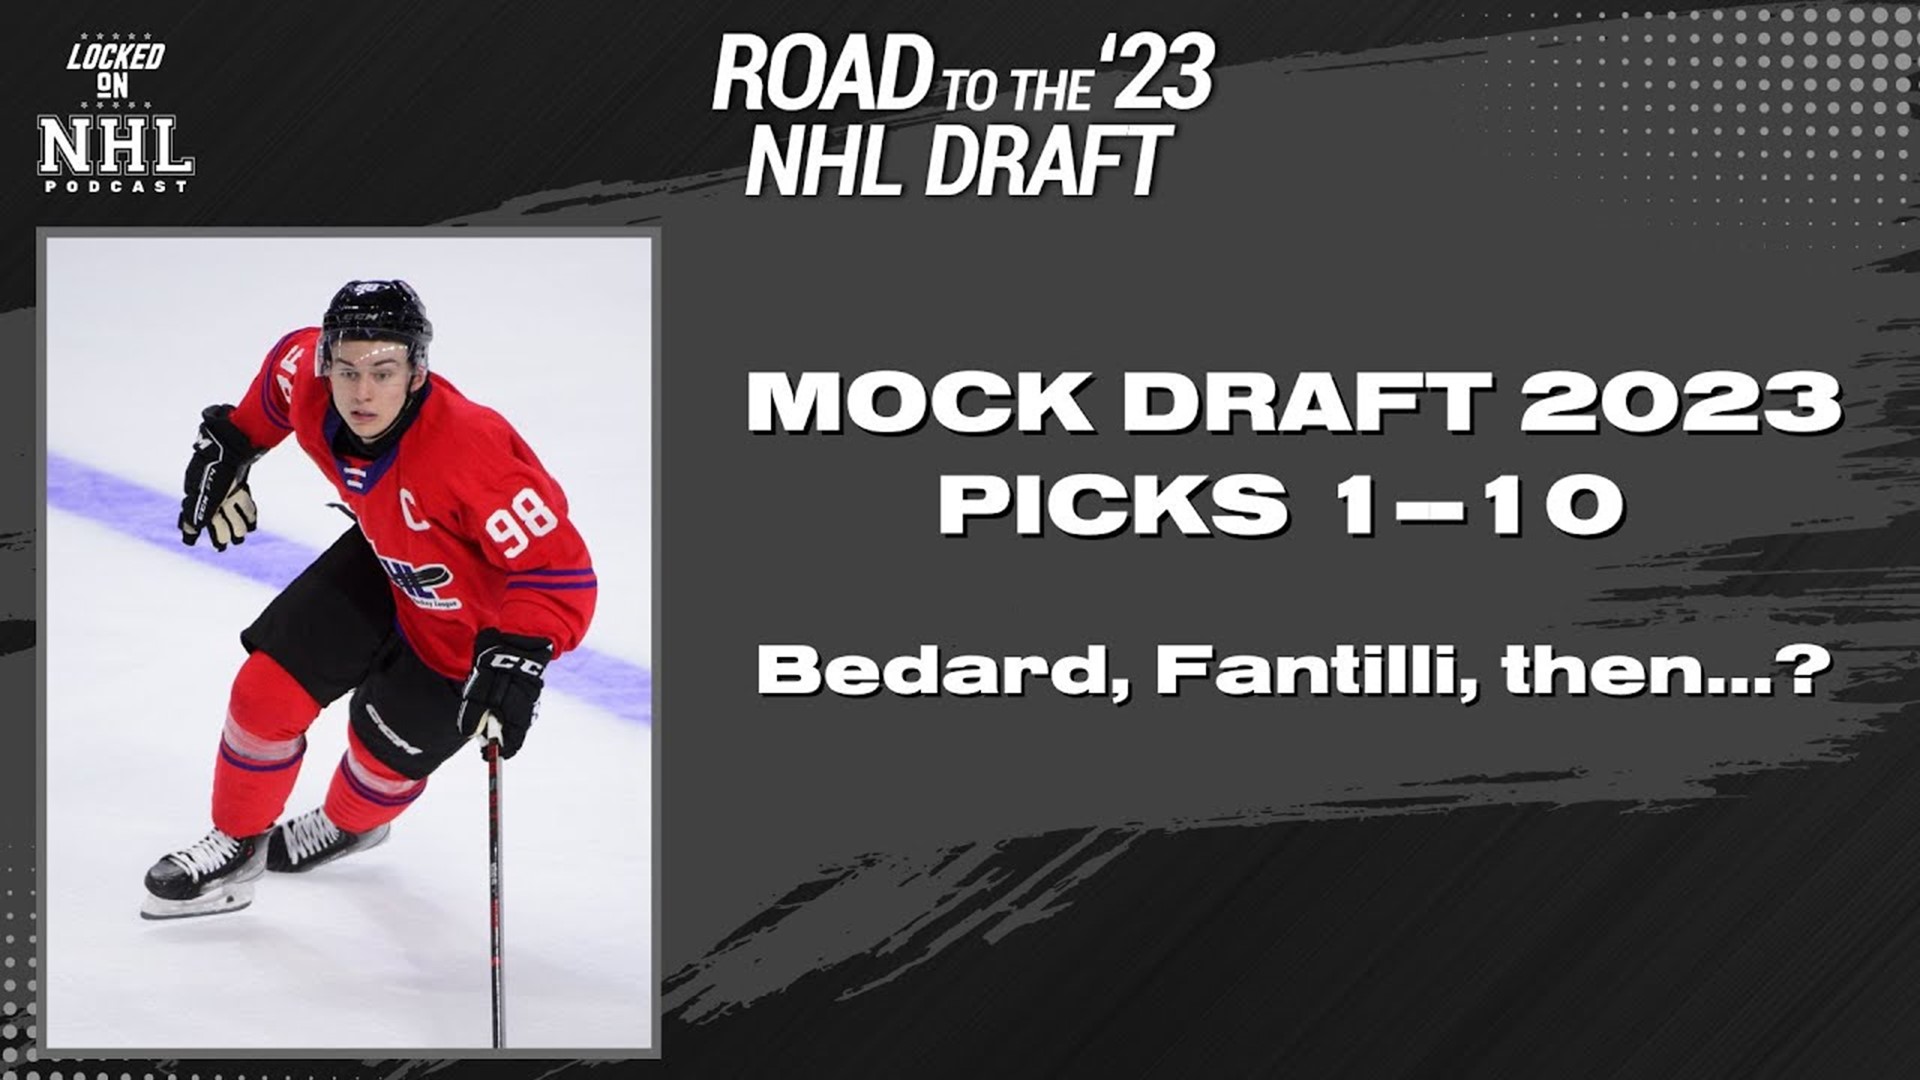 Ryan Leonard Drafted 8th Overall in First Round of 2023 NHL Draft